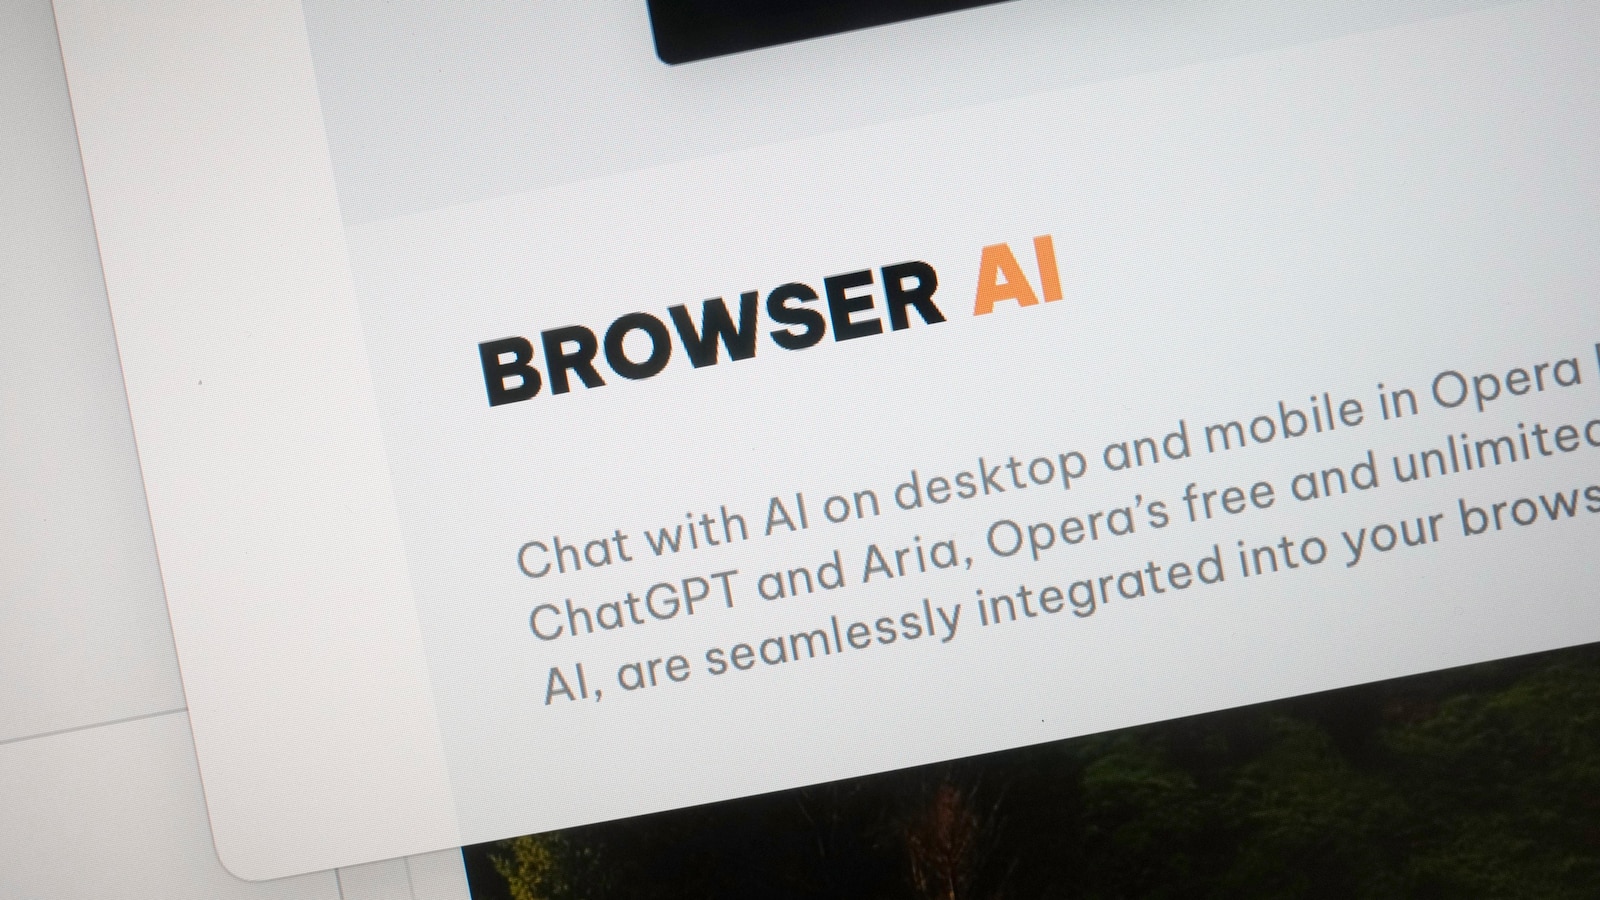 Ready to go beyond Google? Here's how to use new generative AI search sites